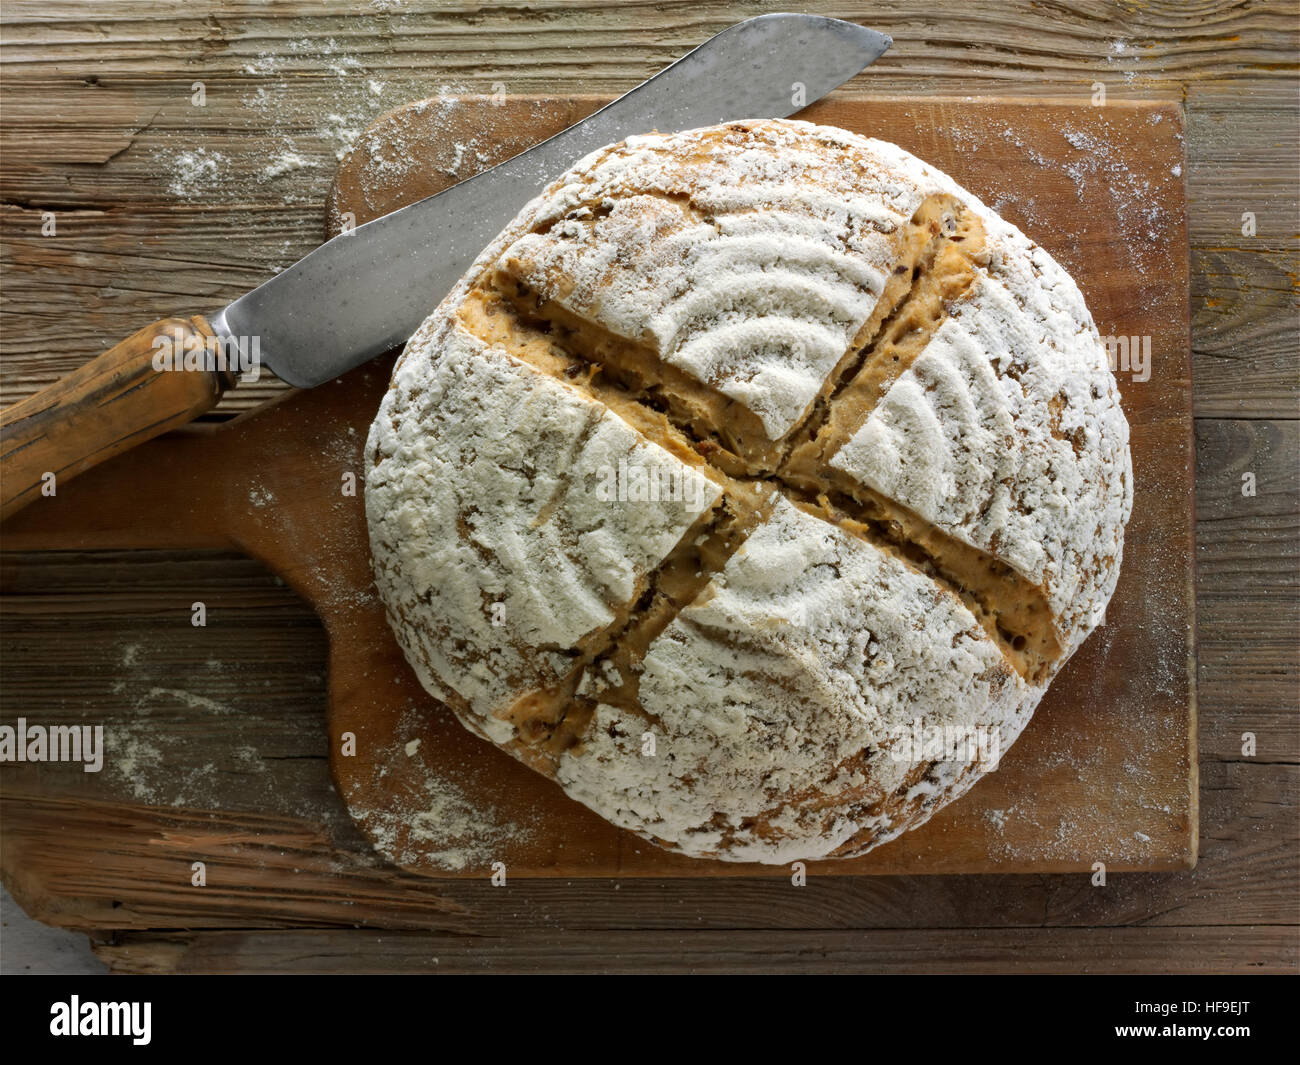 Artisan sour dough wholemeal seed bread with white, malted rye flour Stock Photo